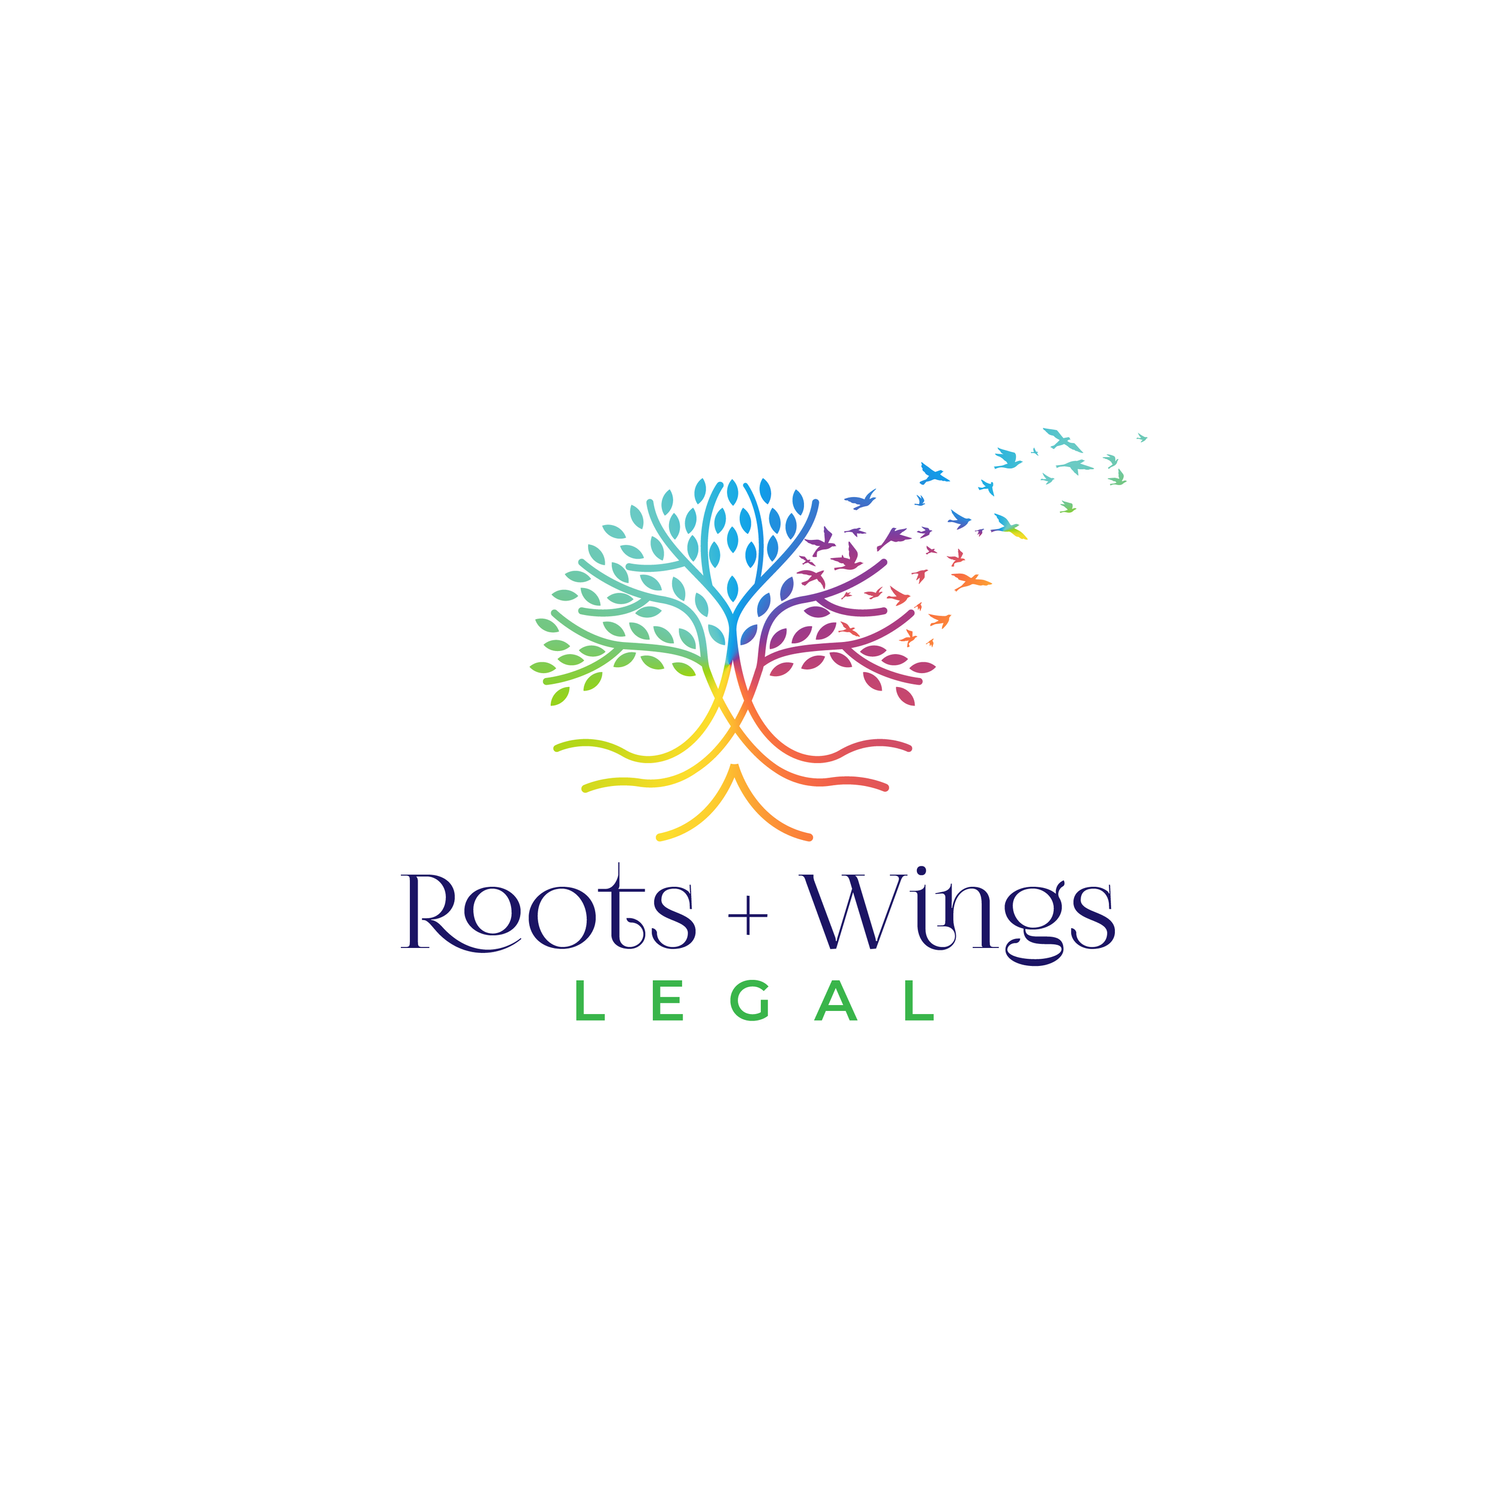 Roots + Wings Legal